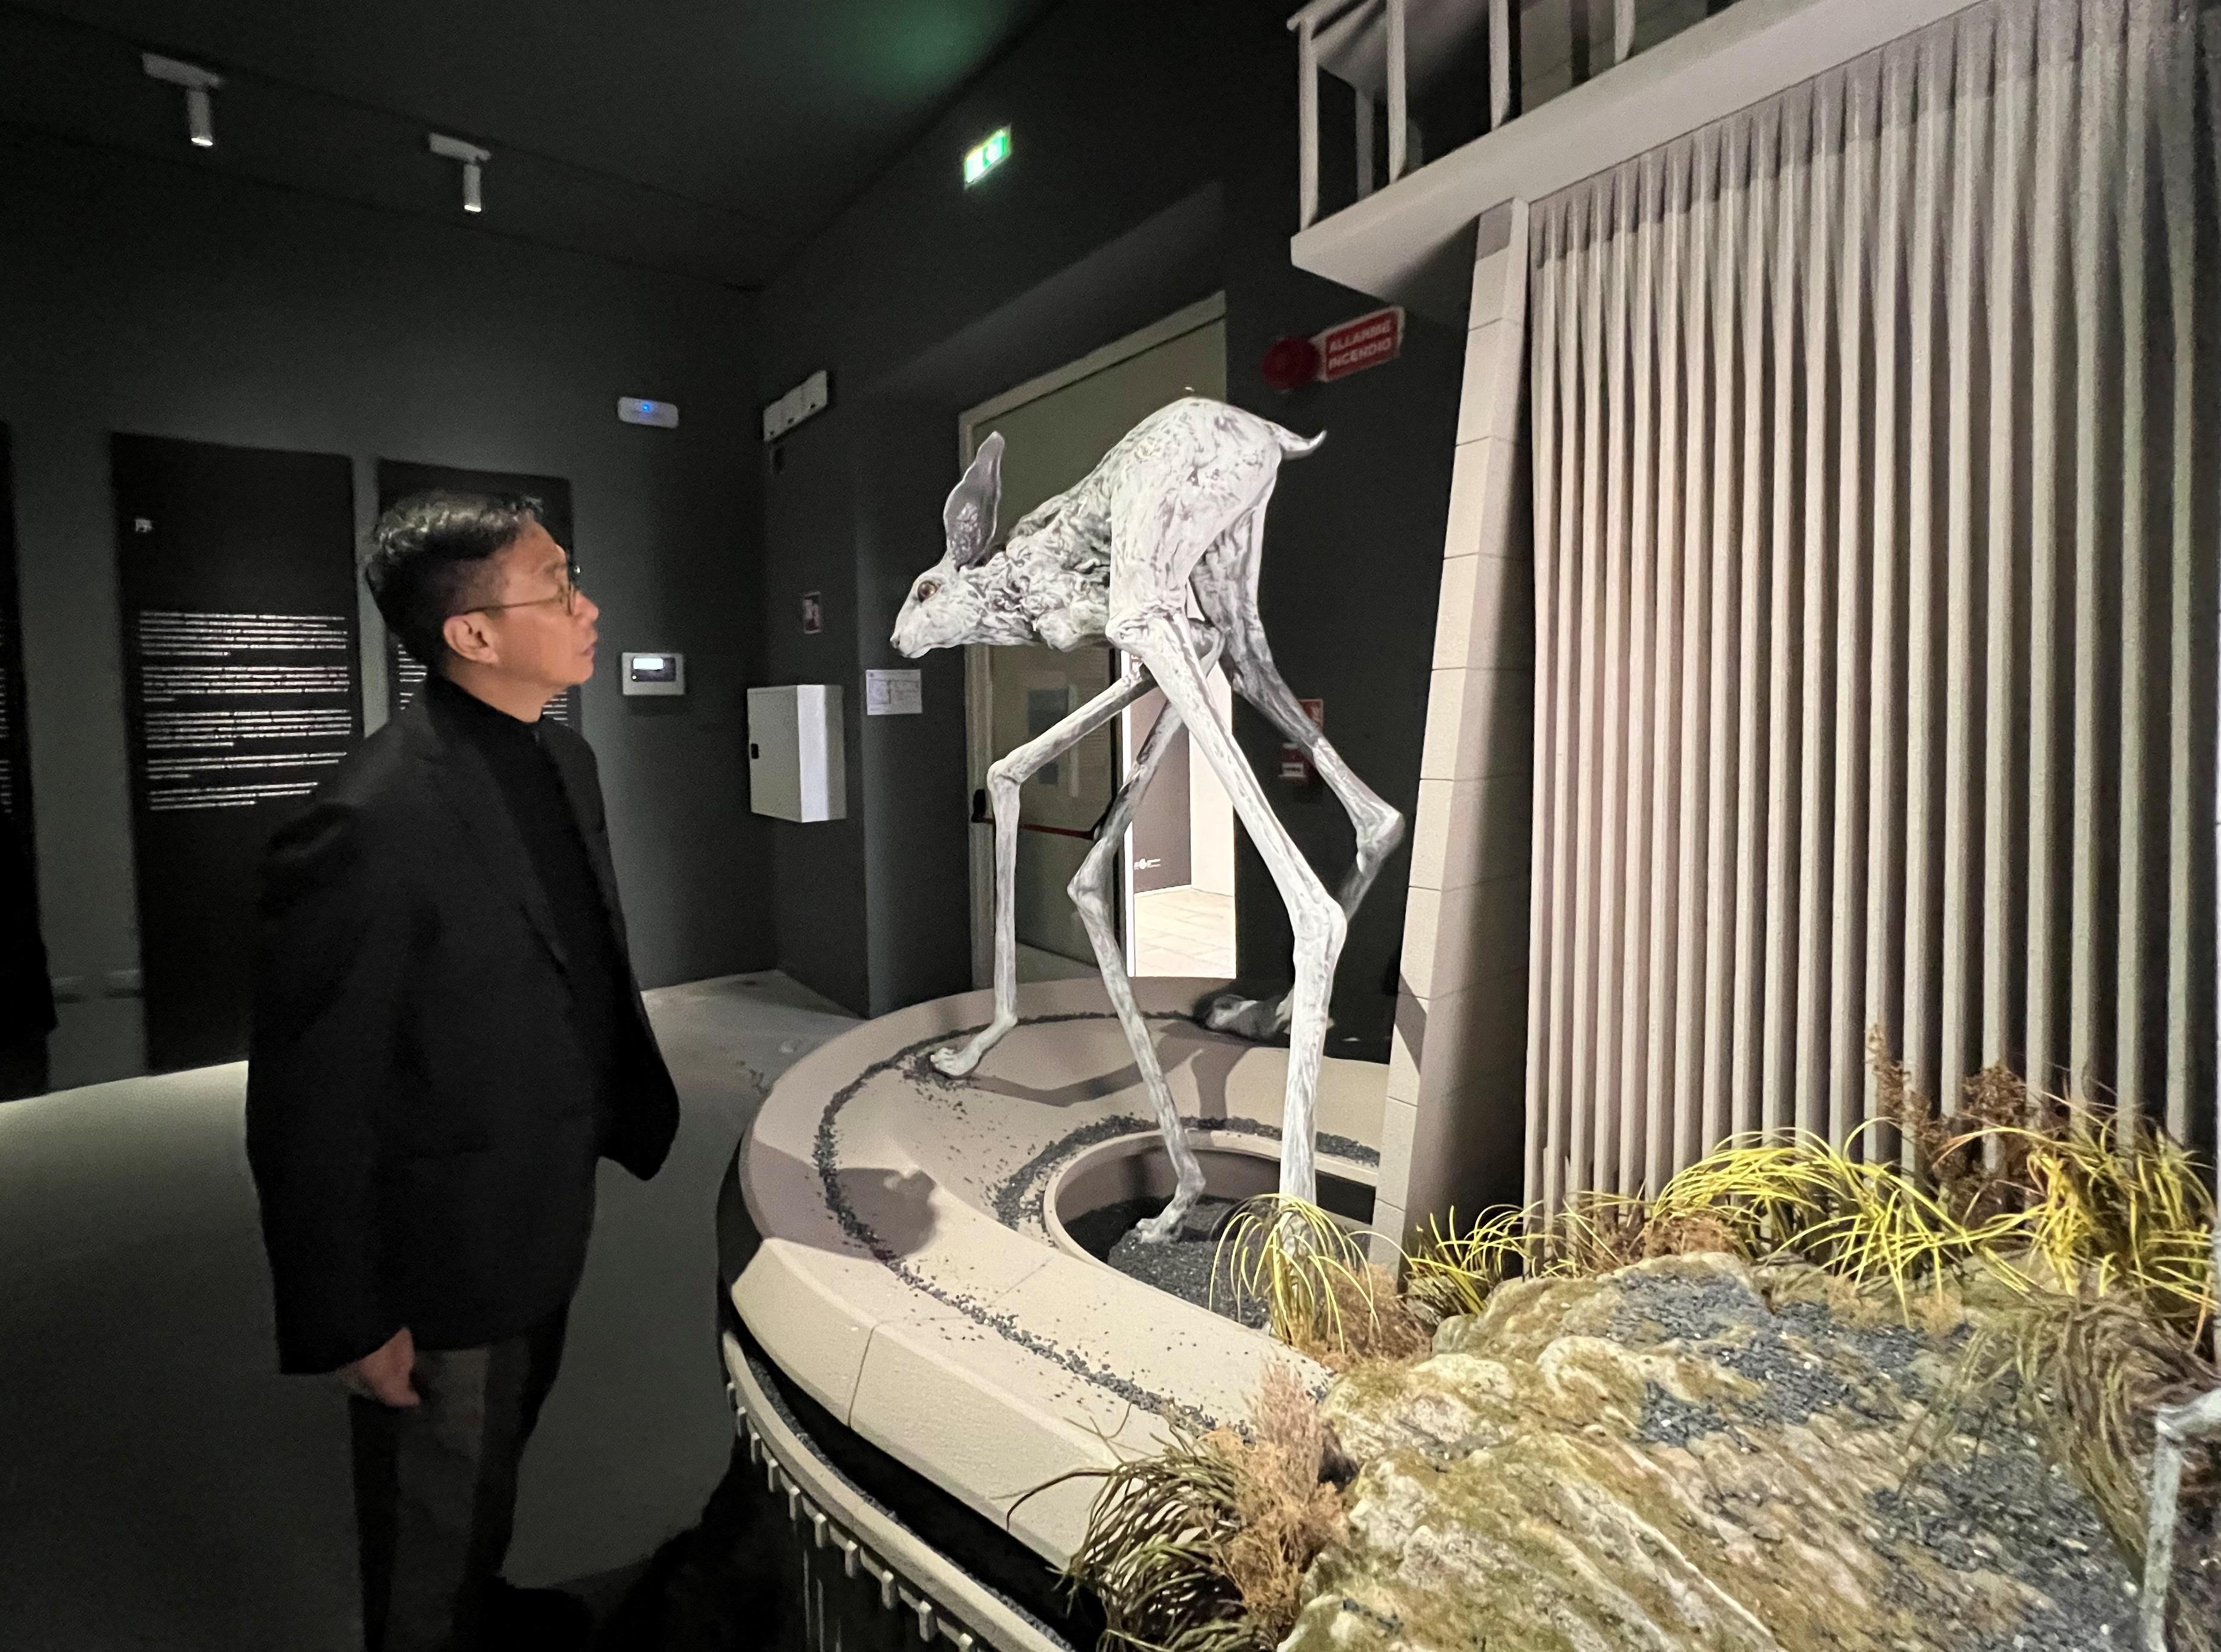 The Secretary for Culture, Sports and Tourism, Mr Kevin Yeung, visited the Macao exhibition at the Venice Biennale in Venice, Italy, yesterday (April 19, Venice time).